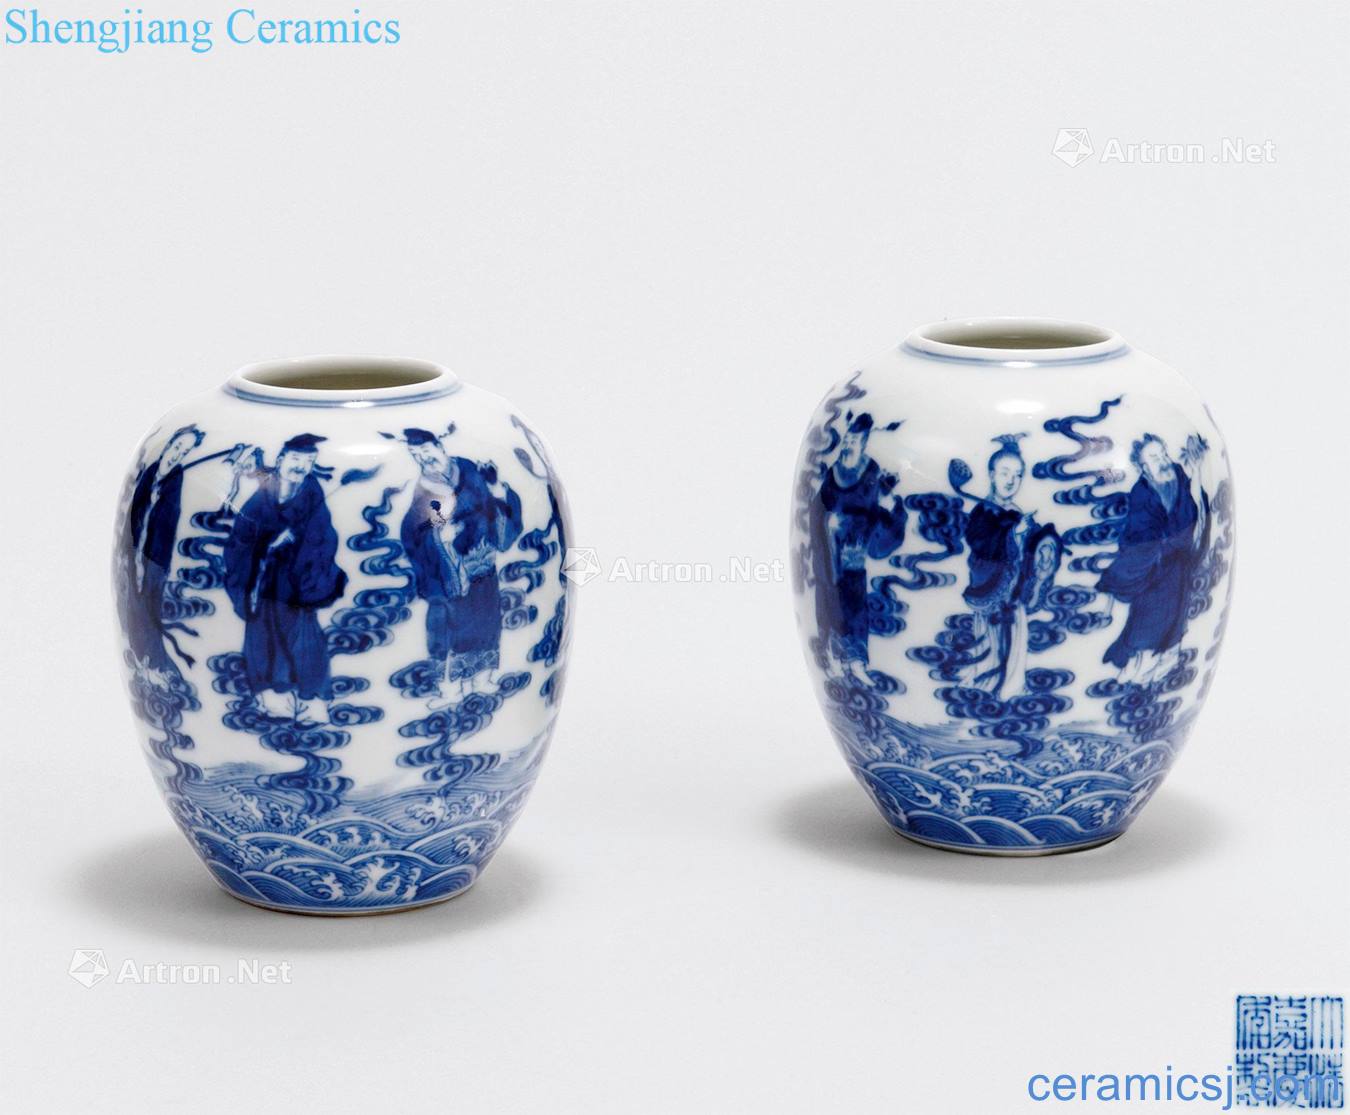 Qing jiaqing The eight immortals canister (a)